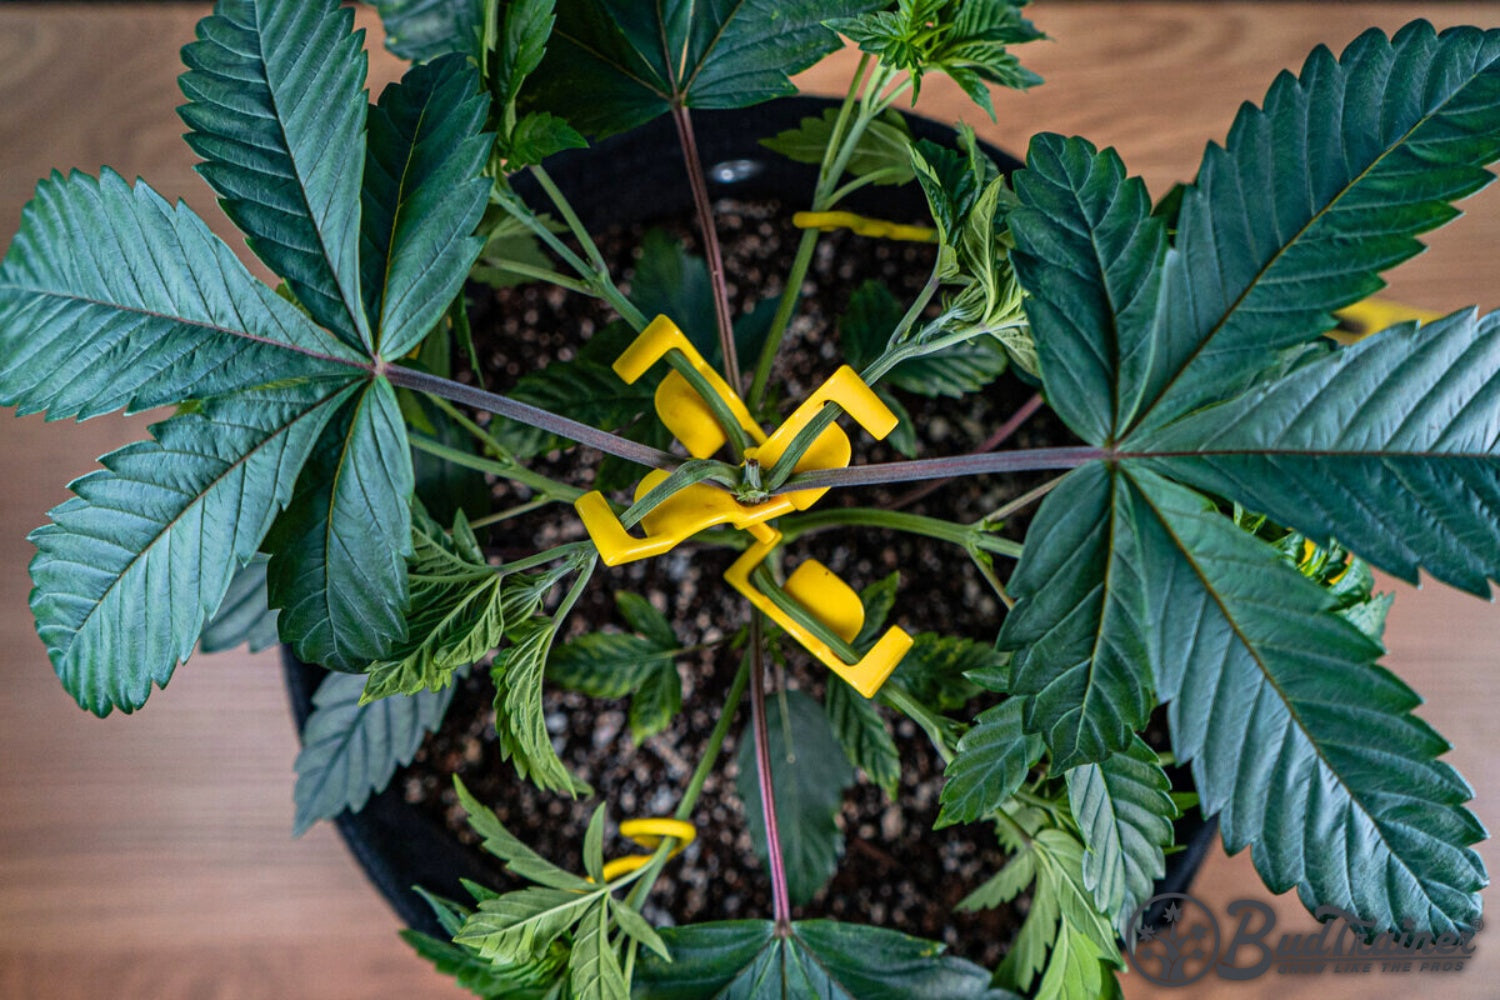 A healthy cannabis plant with lush green leaves growing in a fabric pot, labeled ‘Cannabis Plant Ready for Training,’ with the BudTrainer logo in the bottom right corner.